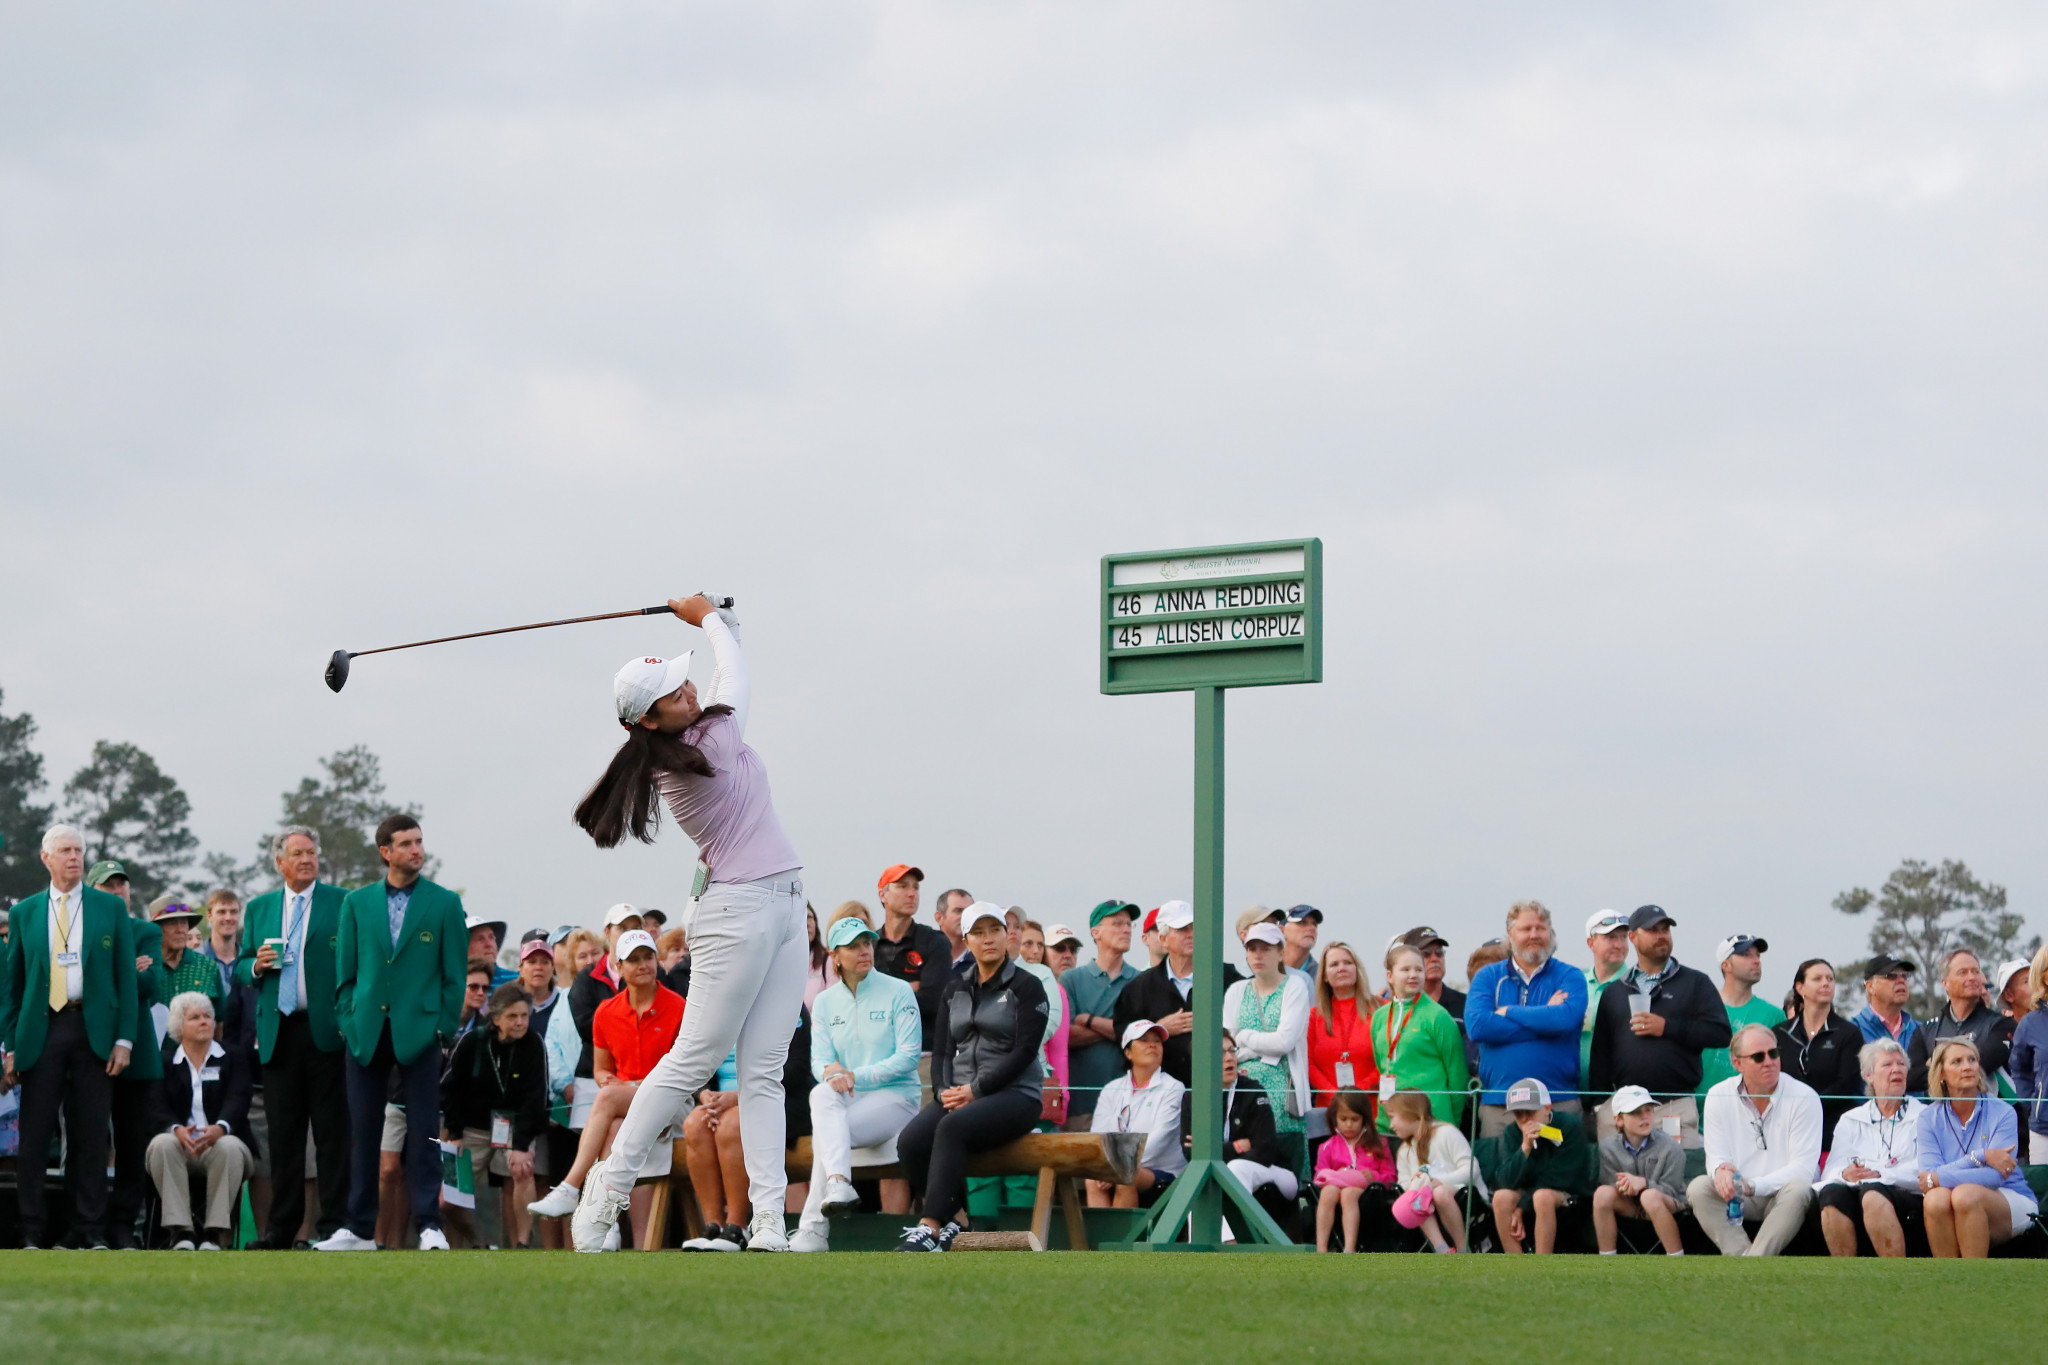 History made as women play first competitive round at Augusta National Golf Club